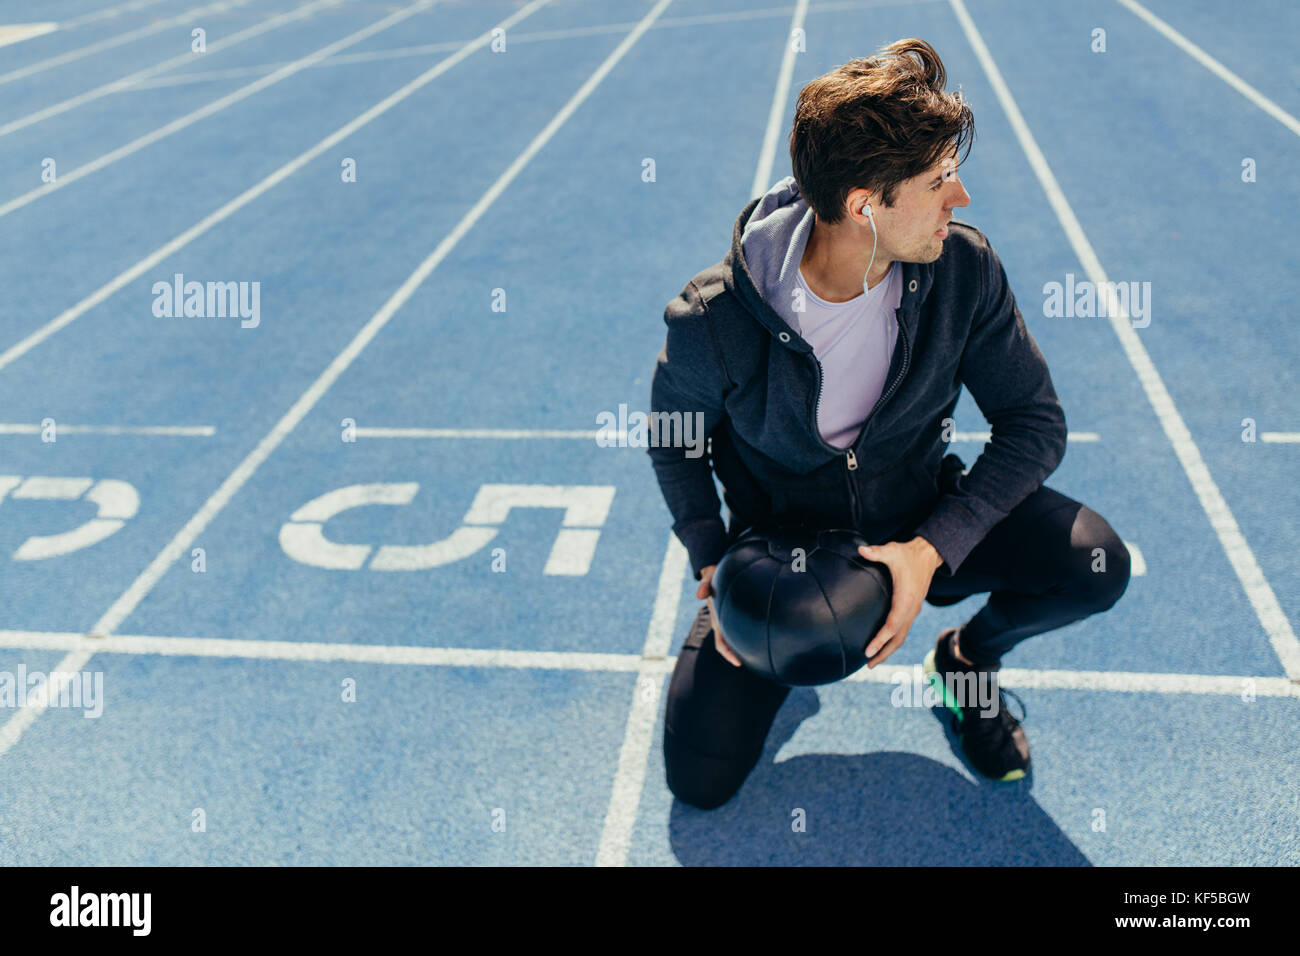 Athlete sitting on a running track near the start line with a medicine ball looking away. Runner wearing earphones sitting on the running track holdin Stock Photo